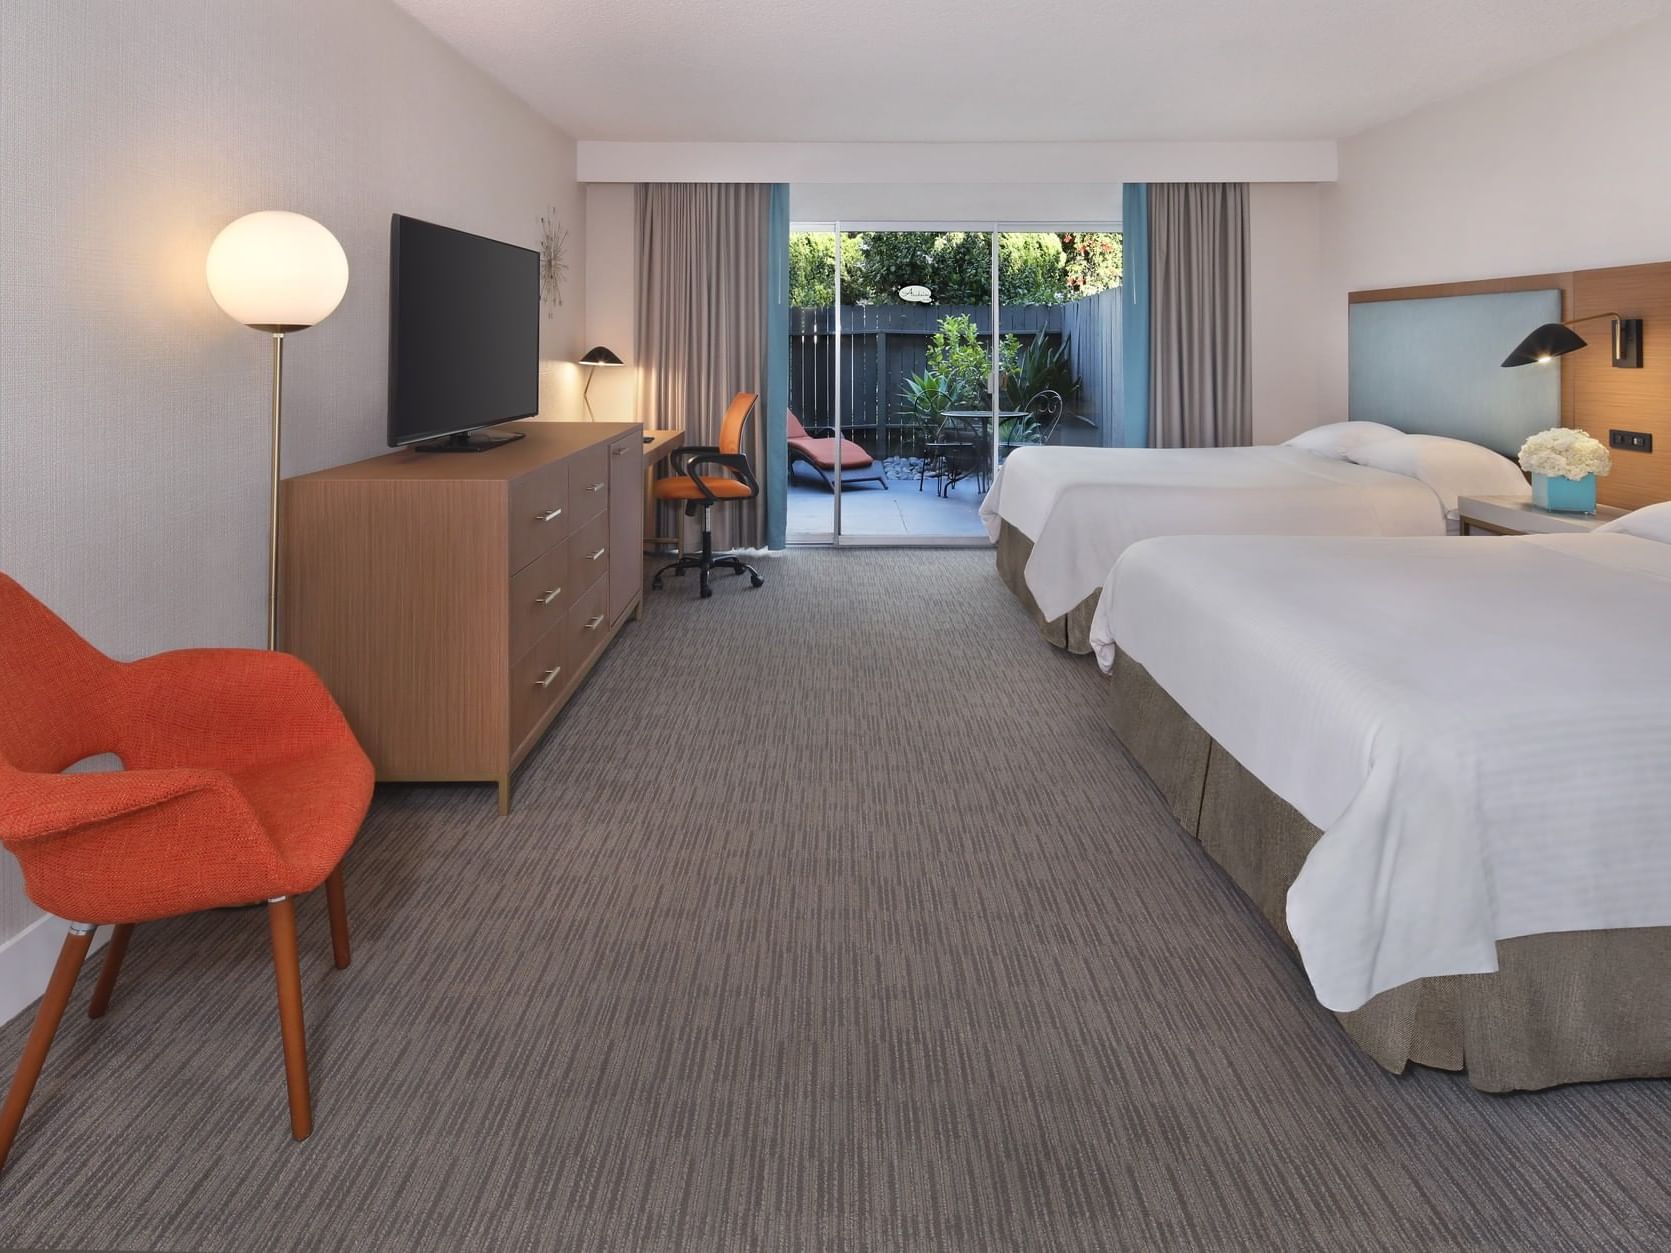 Twin beds, TV & furniture at Two Queen Room, The Anaheim Hotel